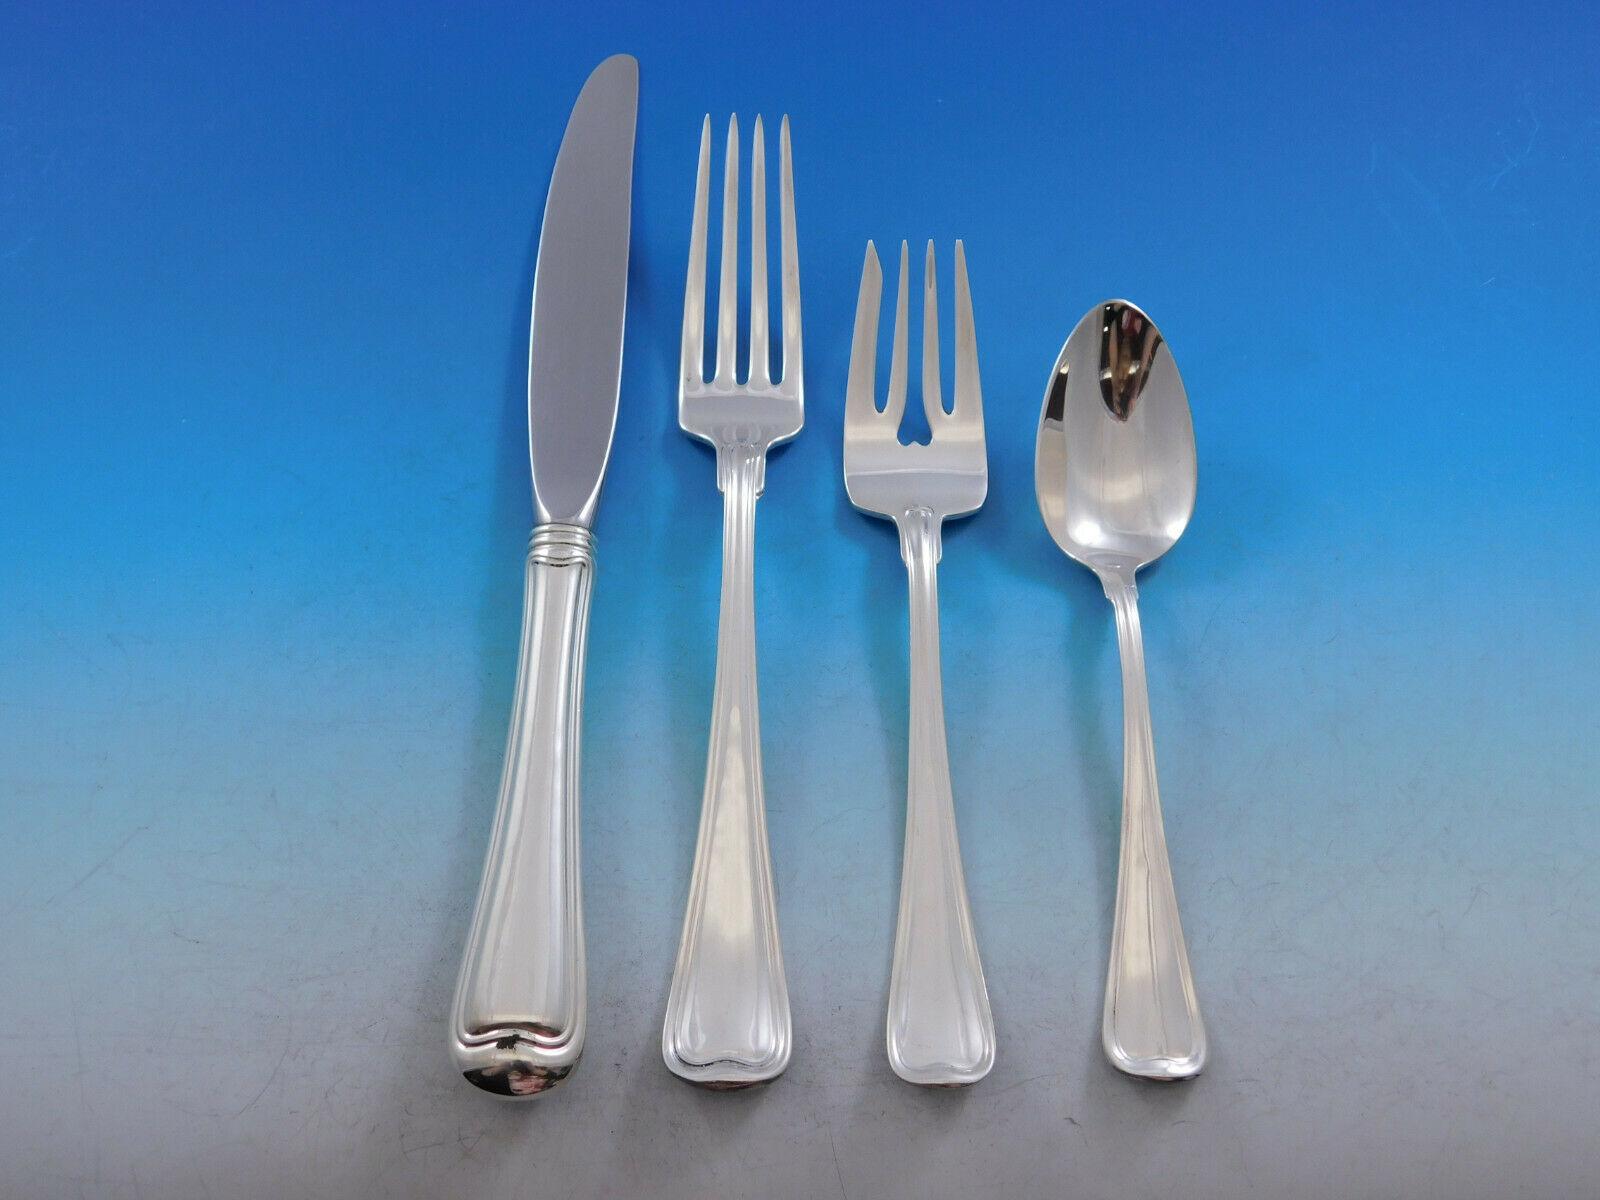 Place size Old French by Gorham sterling silver flatware set, 40 pieces. This set includes:

8 place size knives, 9 1/4